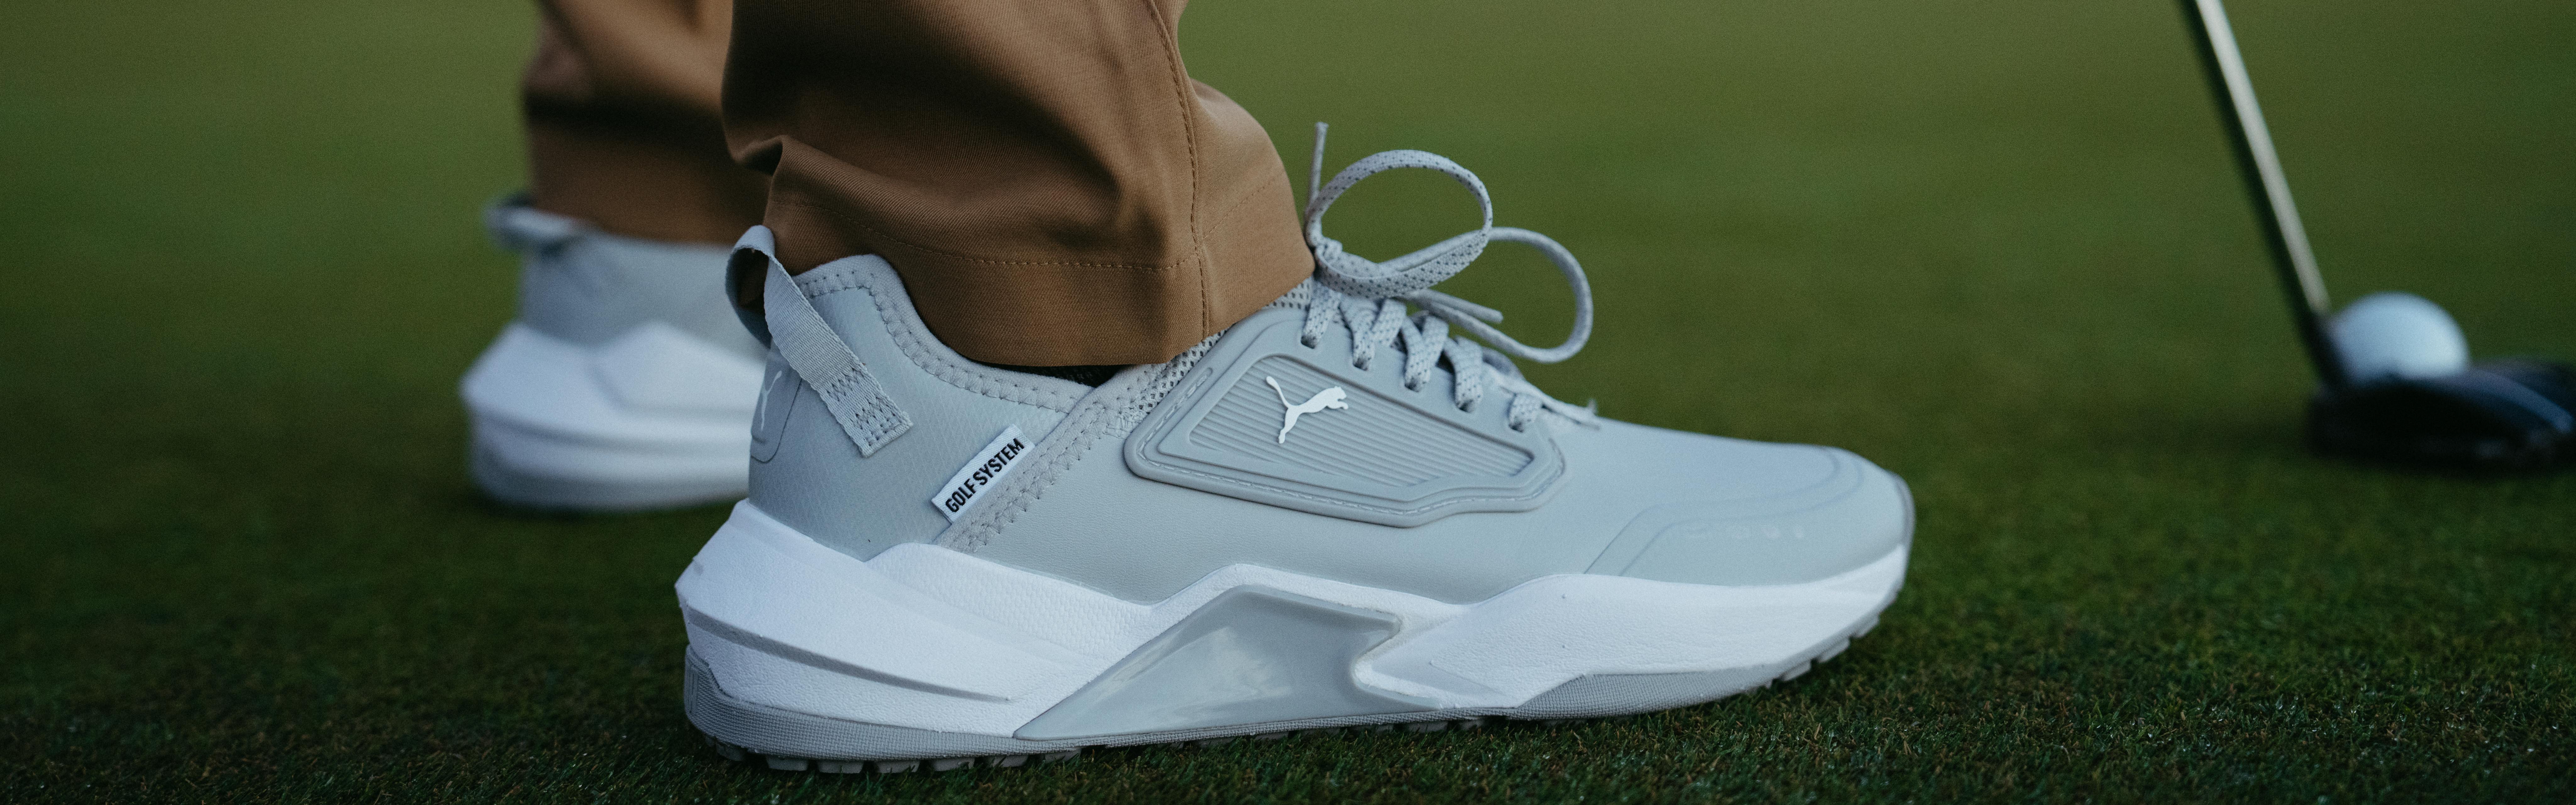 Golf Shoe Buying Guide: Spiked vs. Spikeless 